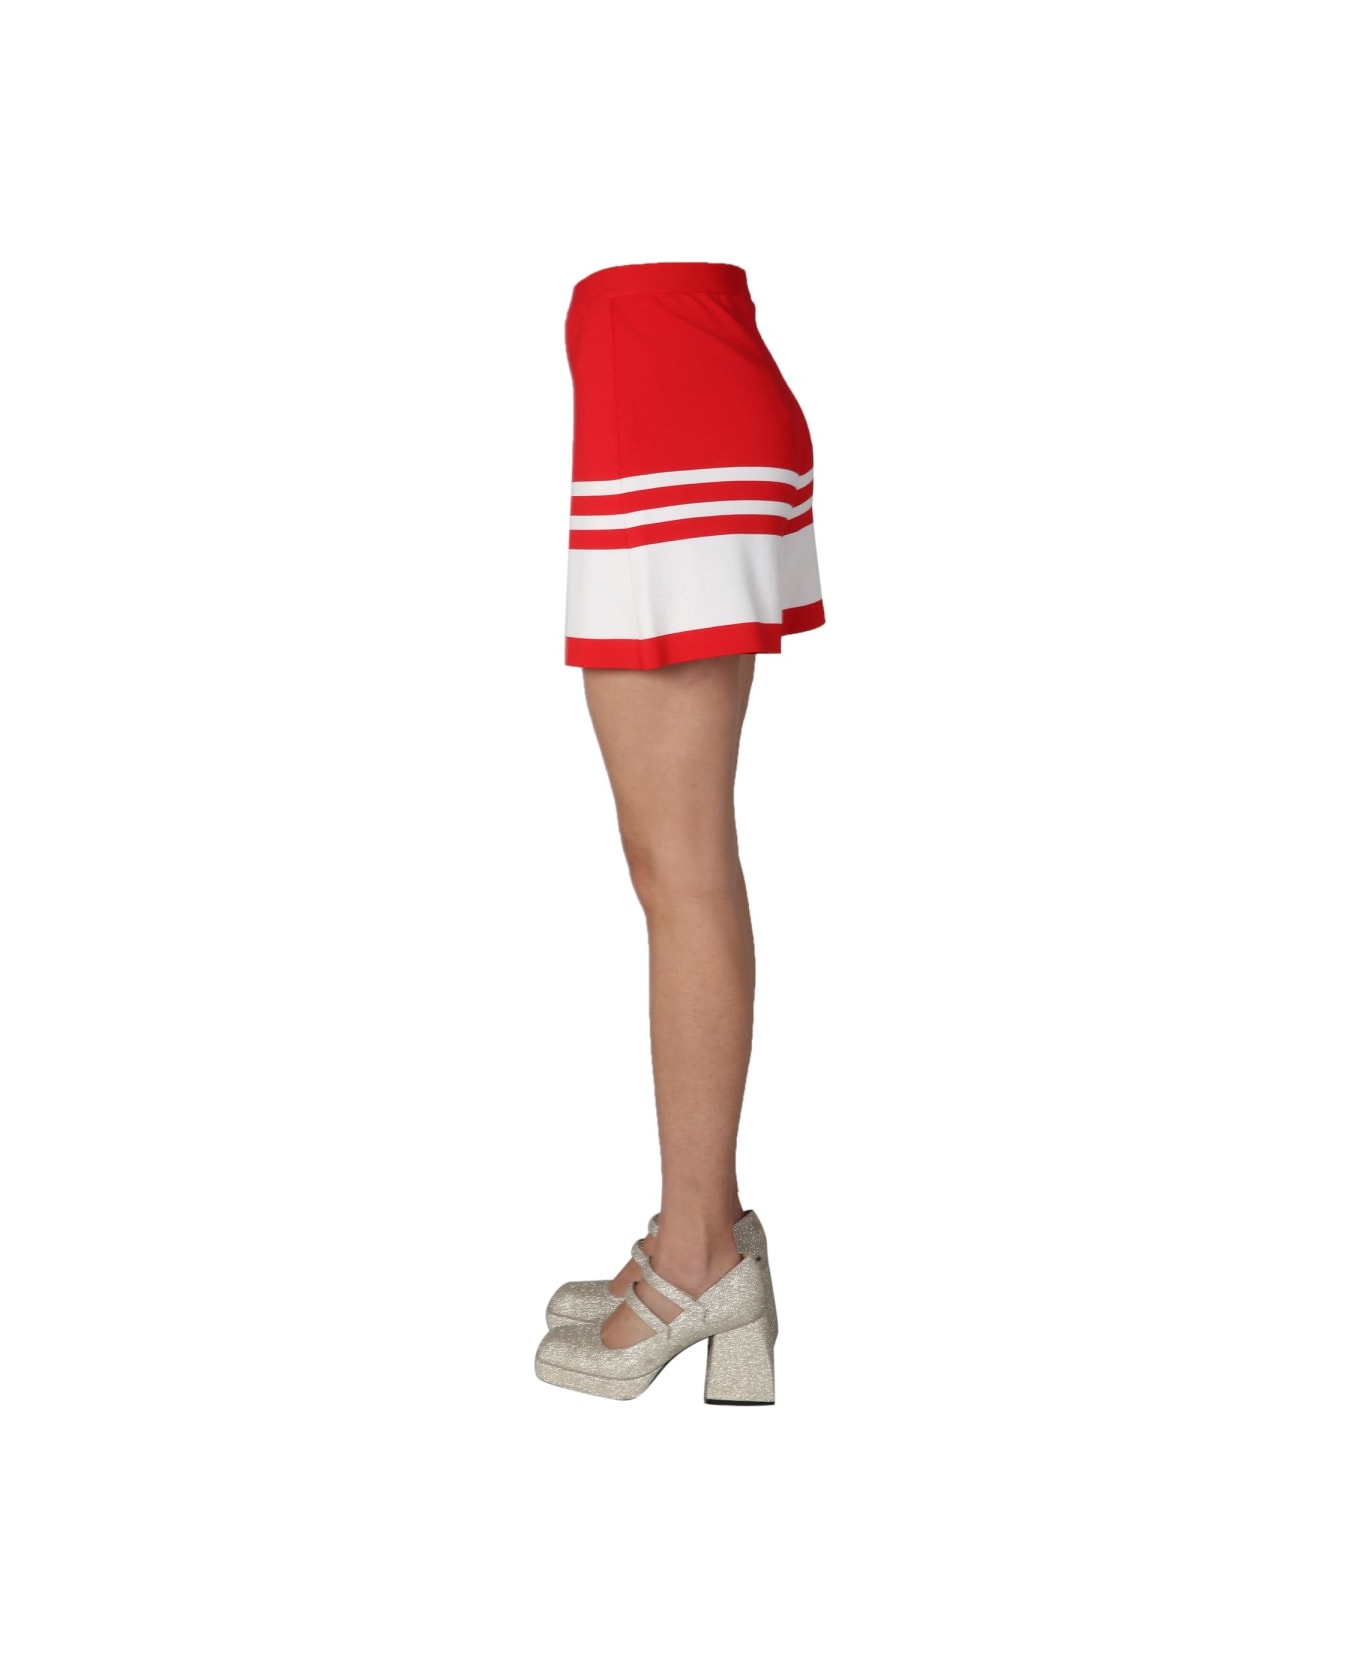 Boutique Moschino "sailor Mood" Shorts - RED ショートパンツ